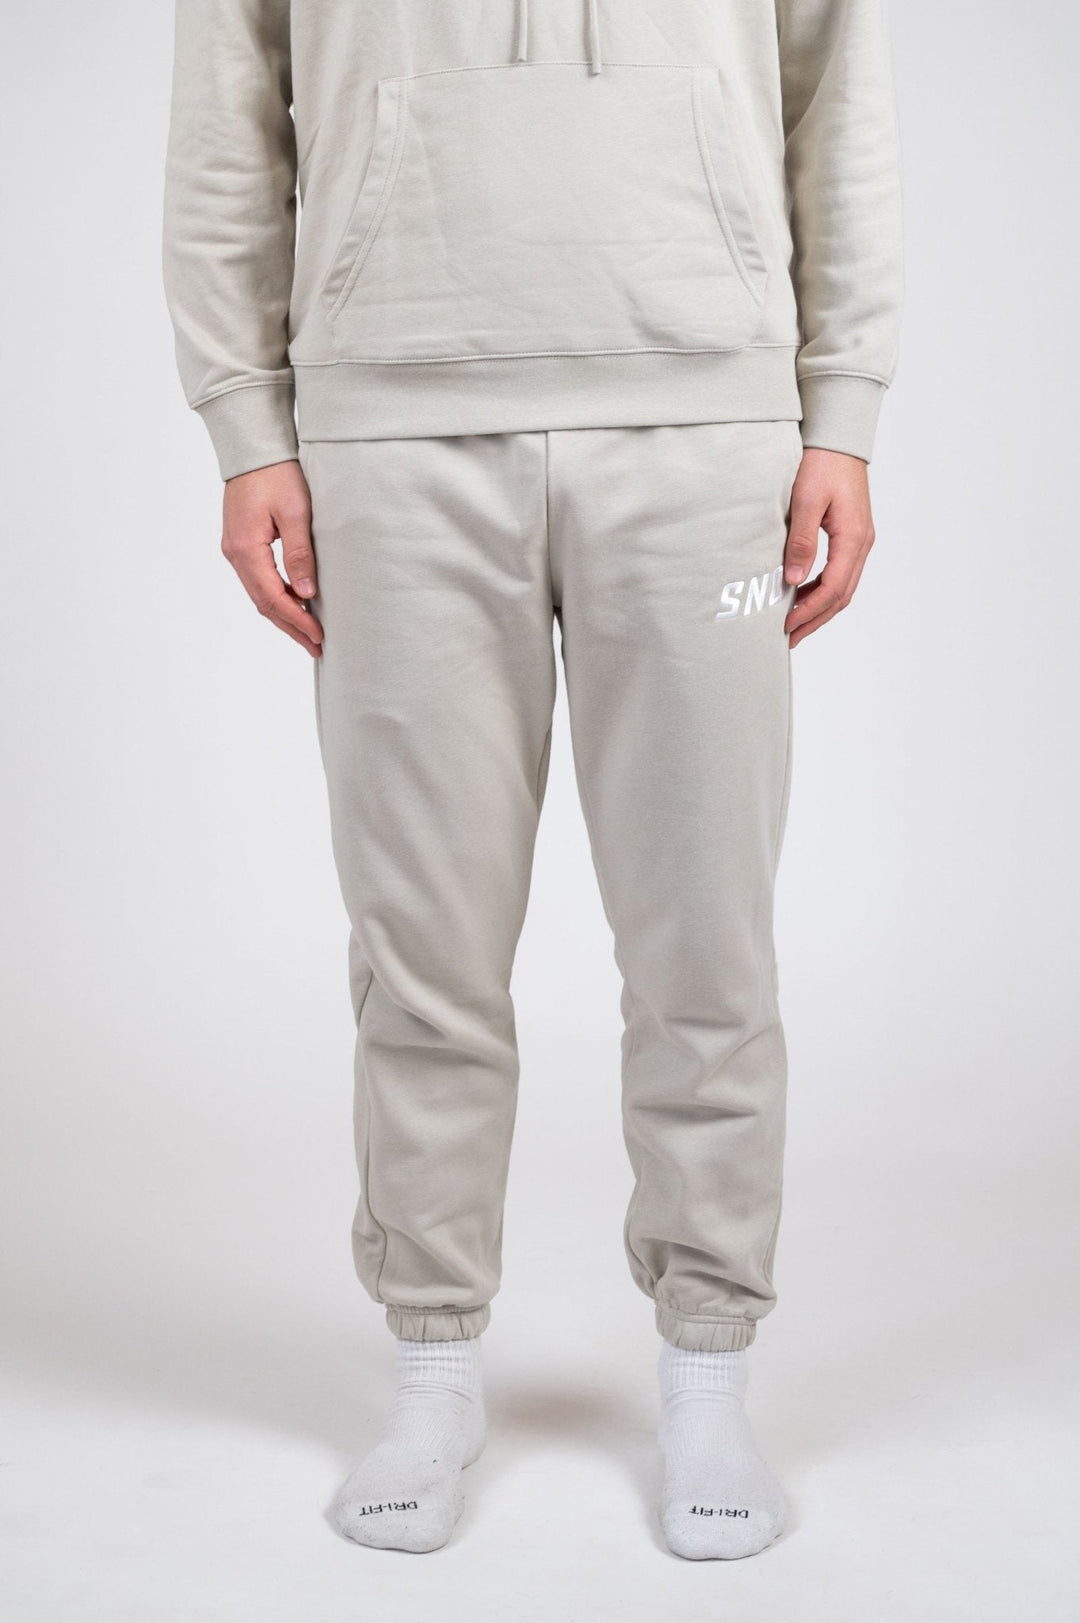 Unisex French Terry Sweatpants - SNO